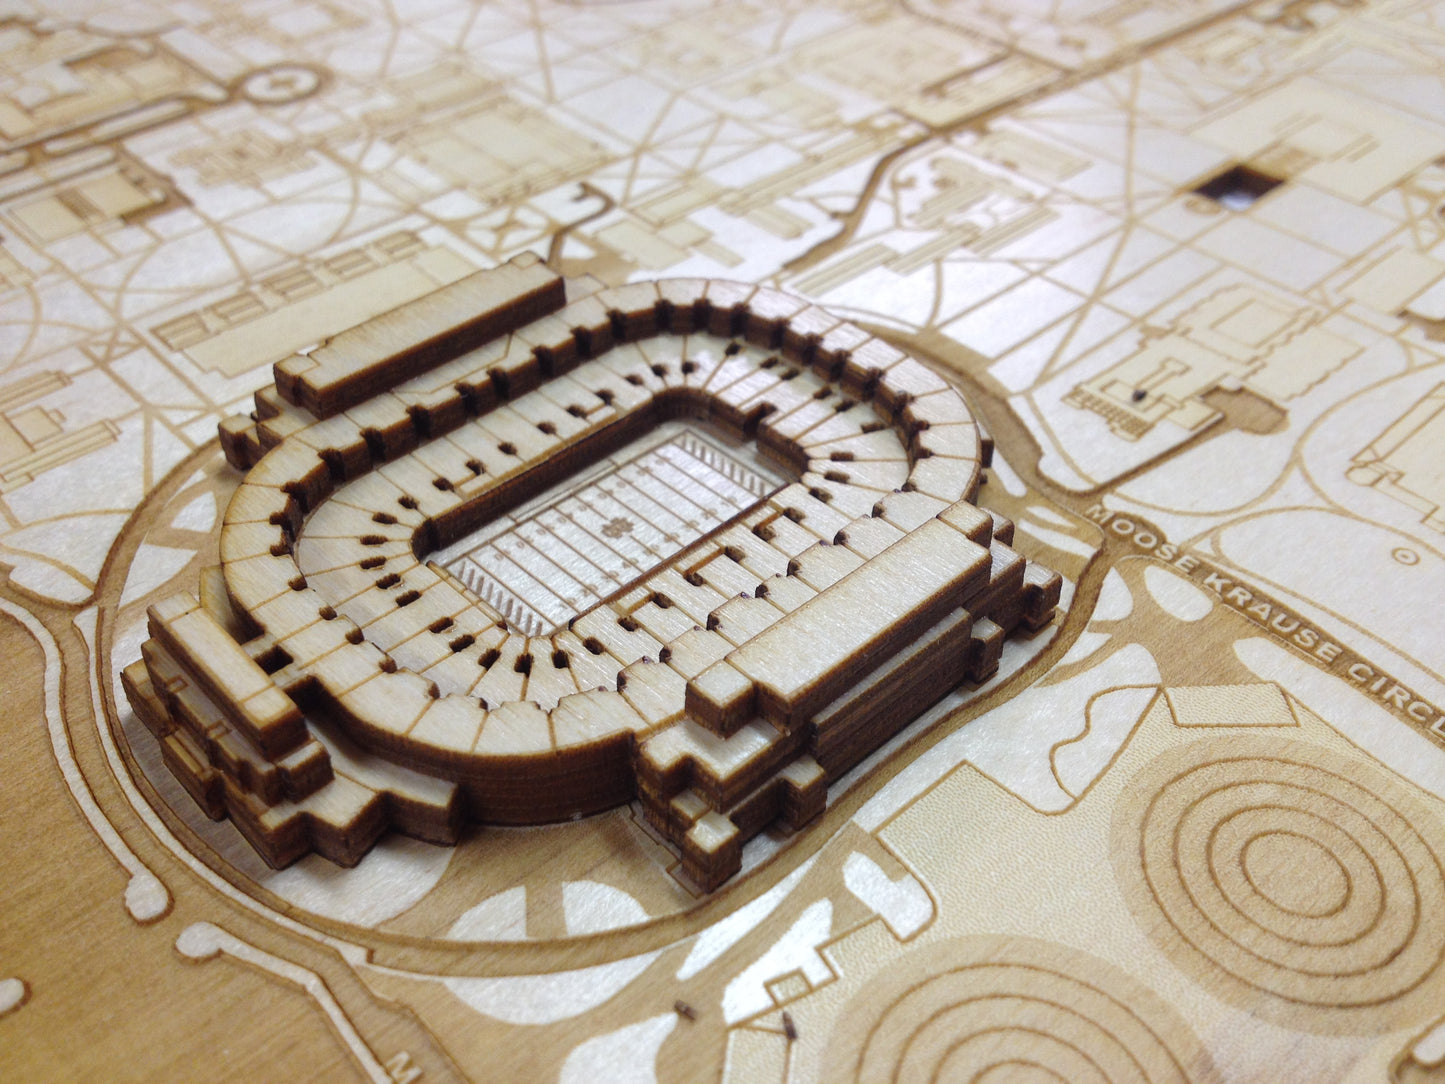 South Bend, Indiana Wall Art City Map (Notre Dame Stadium)